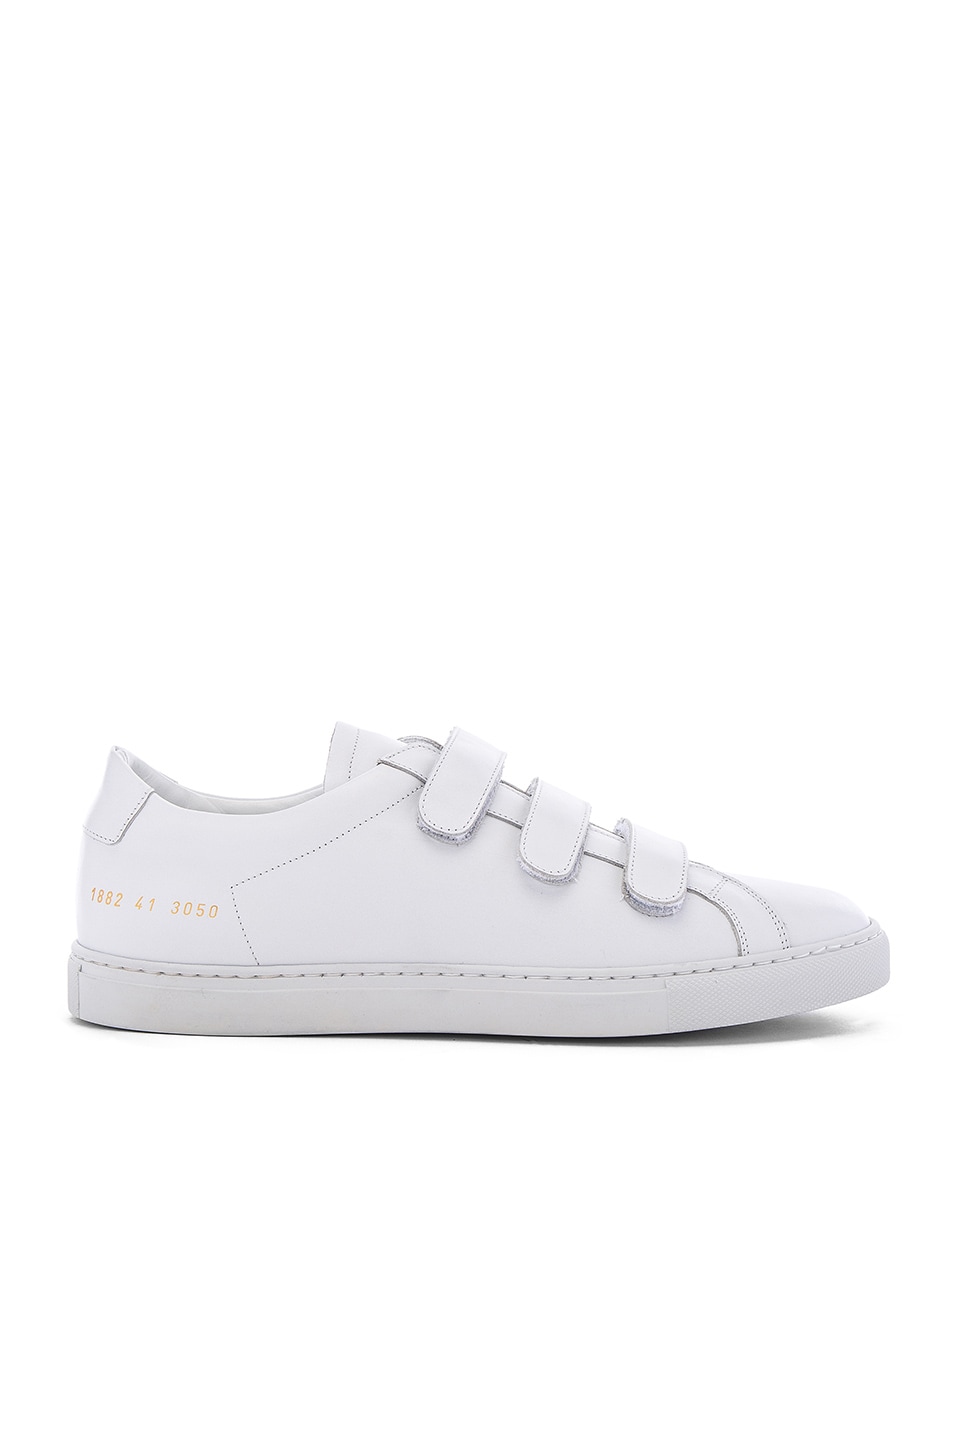 Common Projects Achilles Three Strap in 